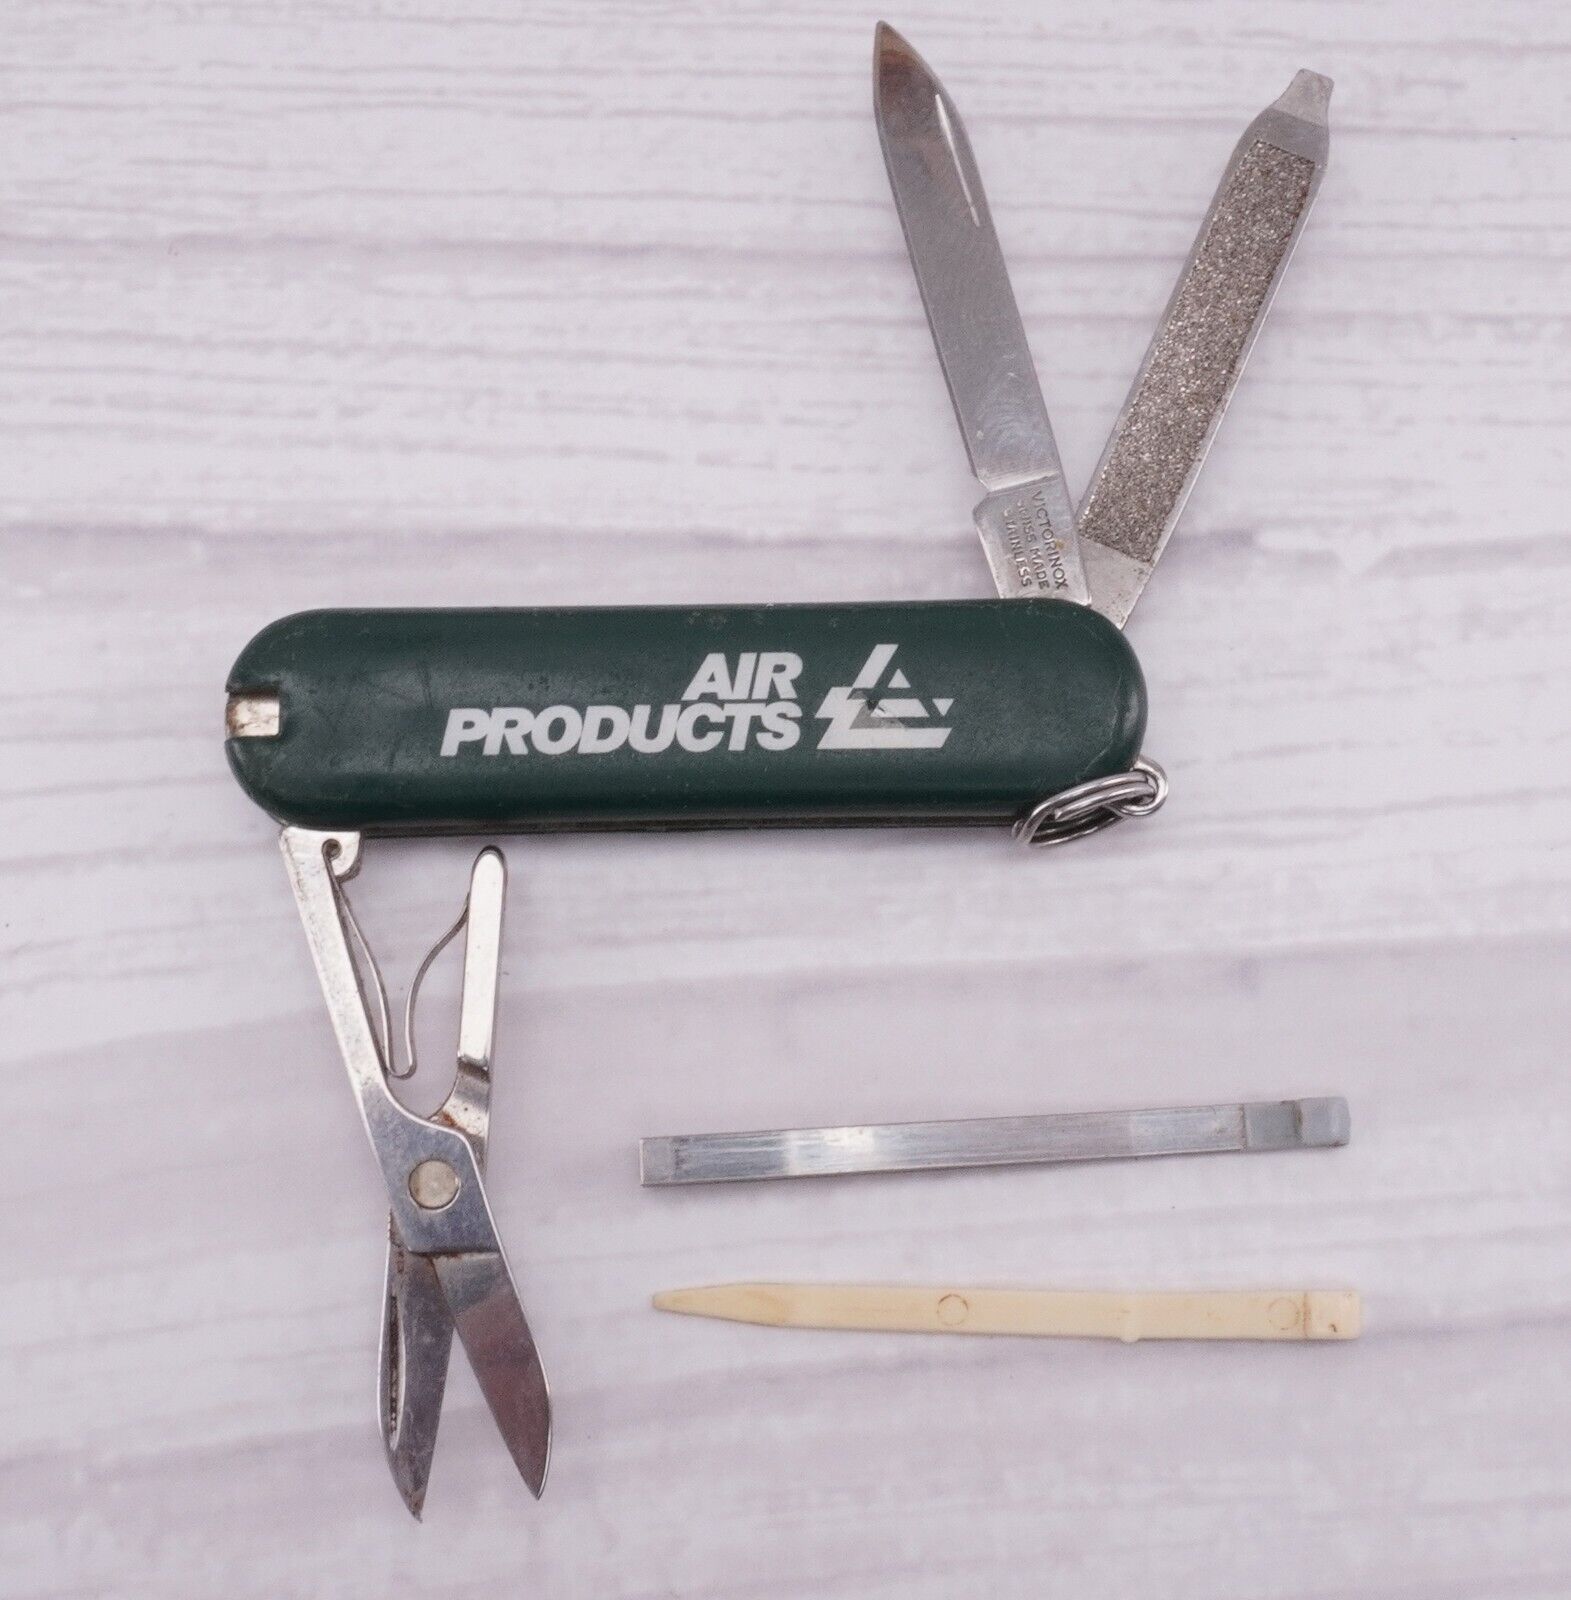 Victorinox Classic Swiss Army knife Branded AIR PRODUCTS Green F7